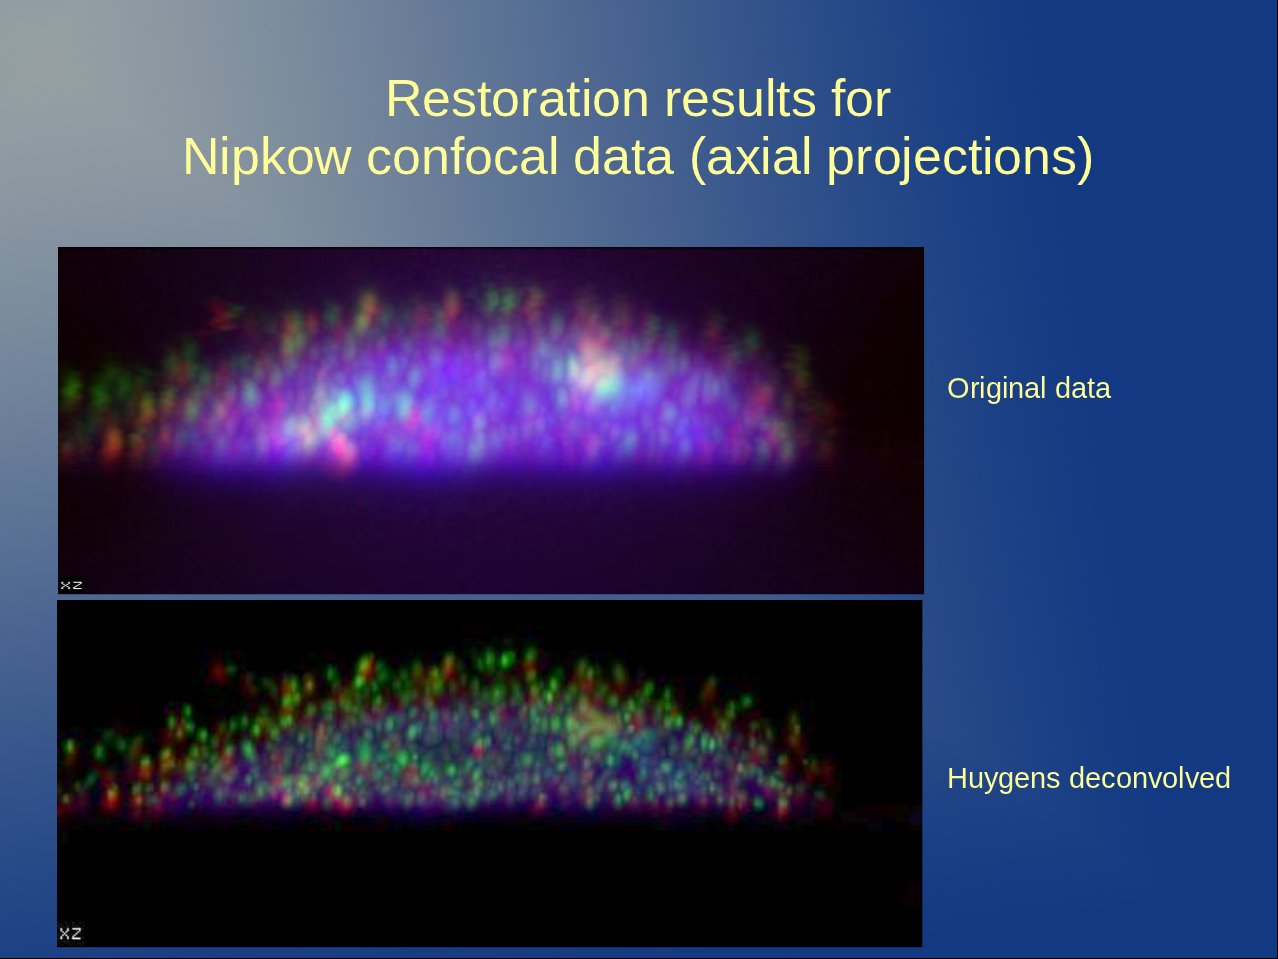 Top picture: XY projections and bottom picture: YZ, XZ projections. Original data as acquired in a Nipkow Disk Microscope shown next to the same image after applying Huygens Deconvolution. The red and green signals are clearly separated much more after the restoration. Calculating colocalization in the original data would have caused fake colocalization levels. Data courtesy Dr. Kozubek, Brno, Czech republic, FP6 3DGenome Project